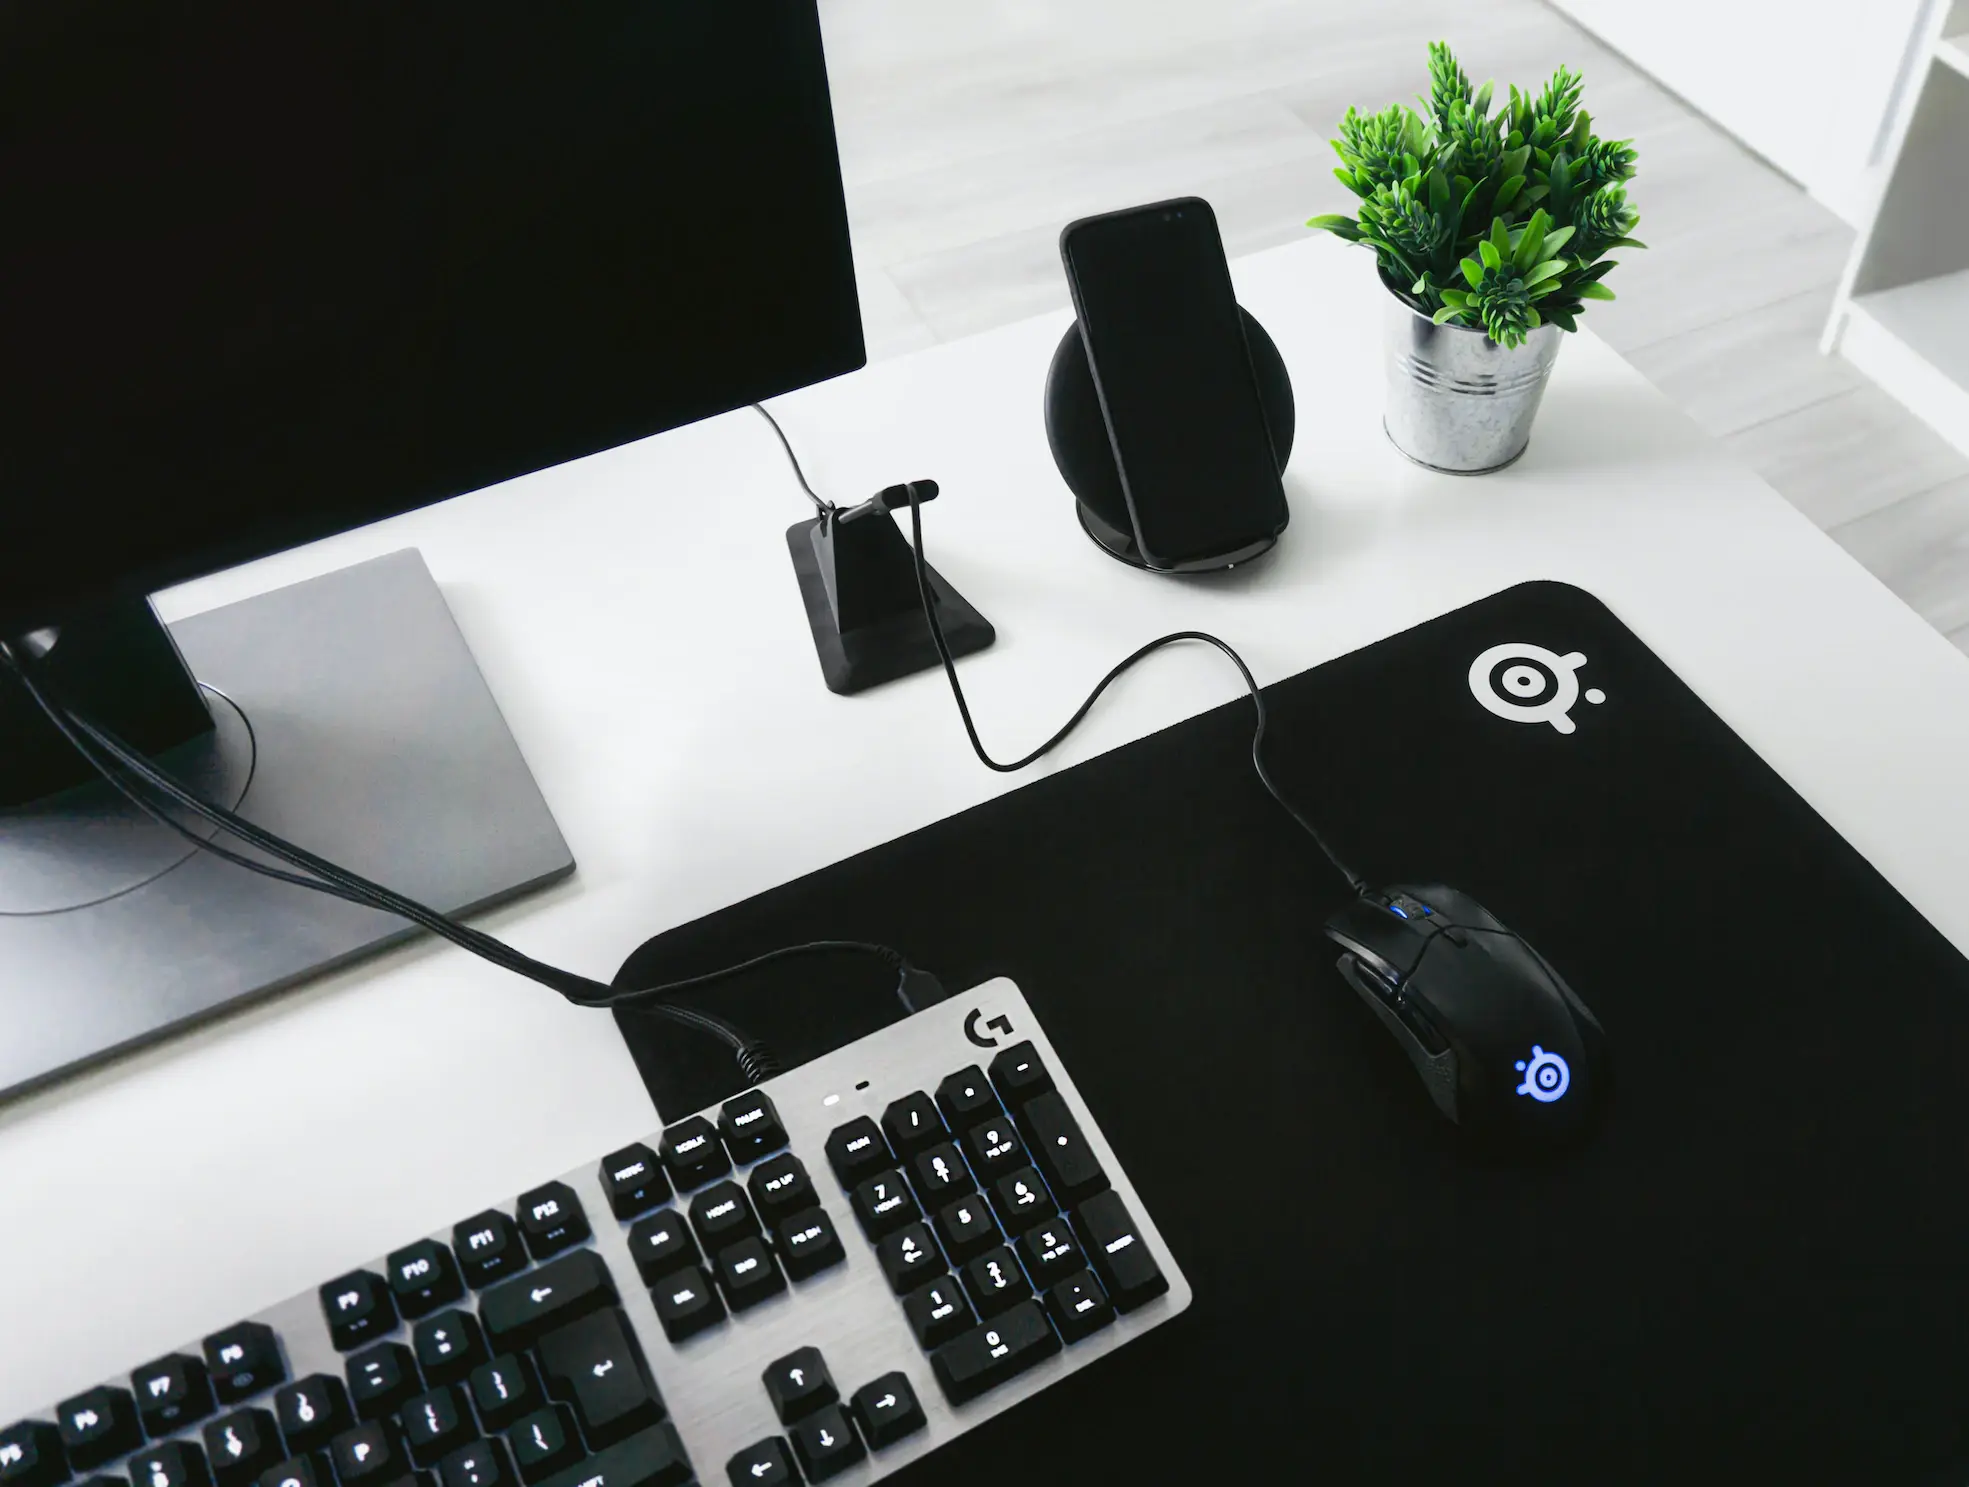 Ergonomic keyboard and mouse promote the right posture for your hands when working remotely